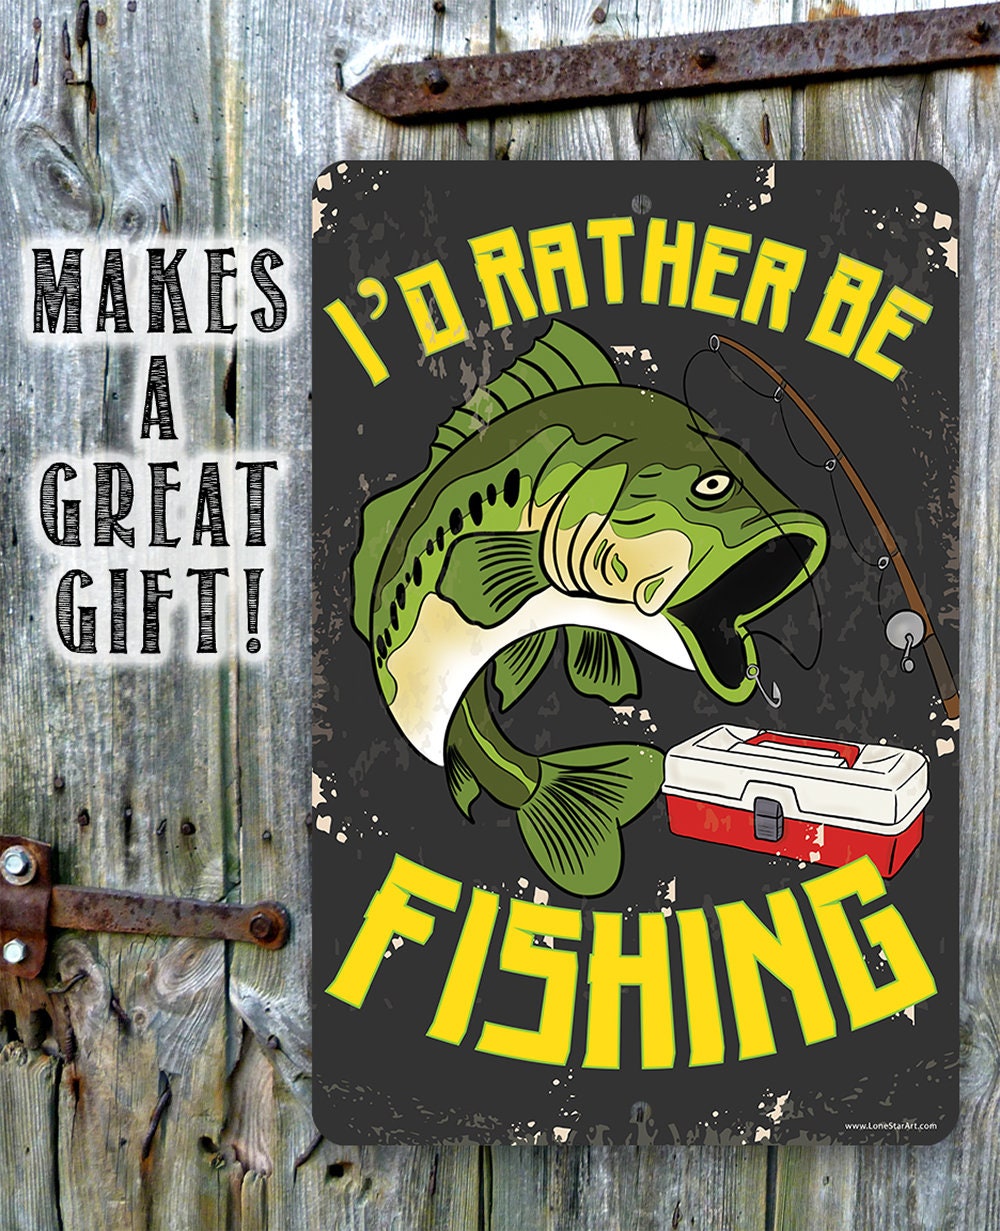 I'd Rather Be Fishing - Metal Sign Metal Sign Lone Star Art 